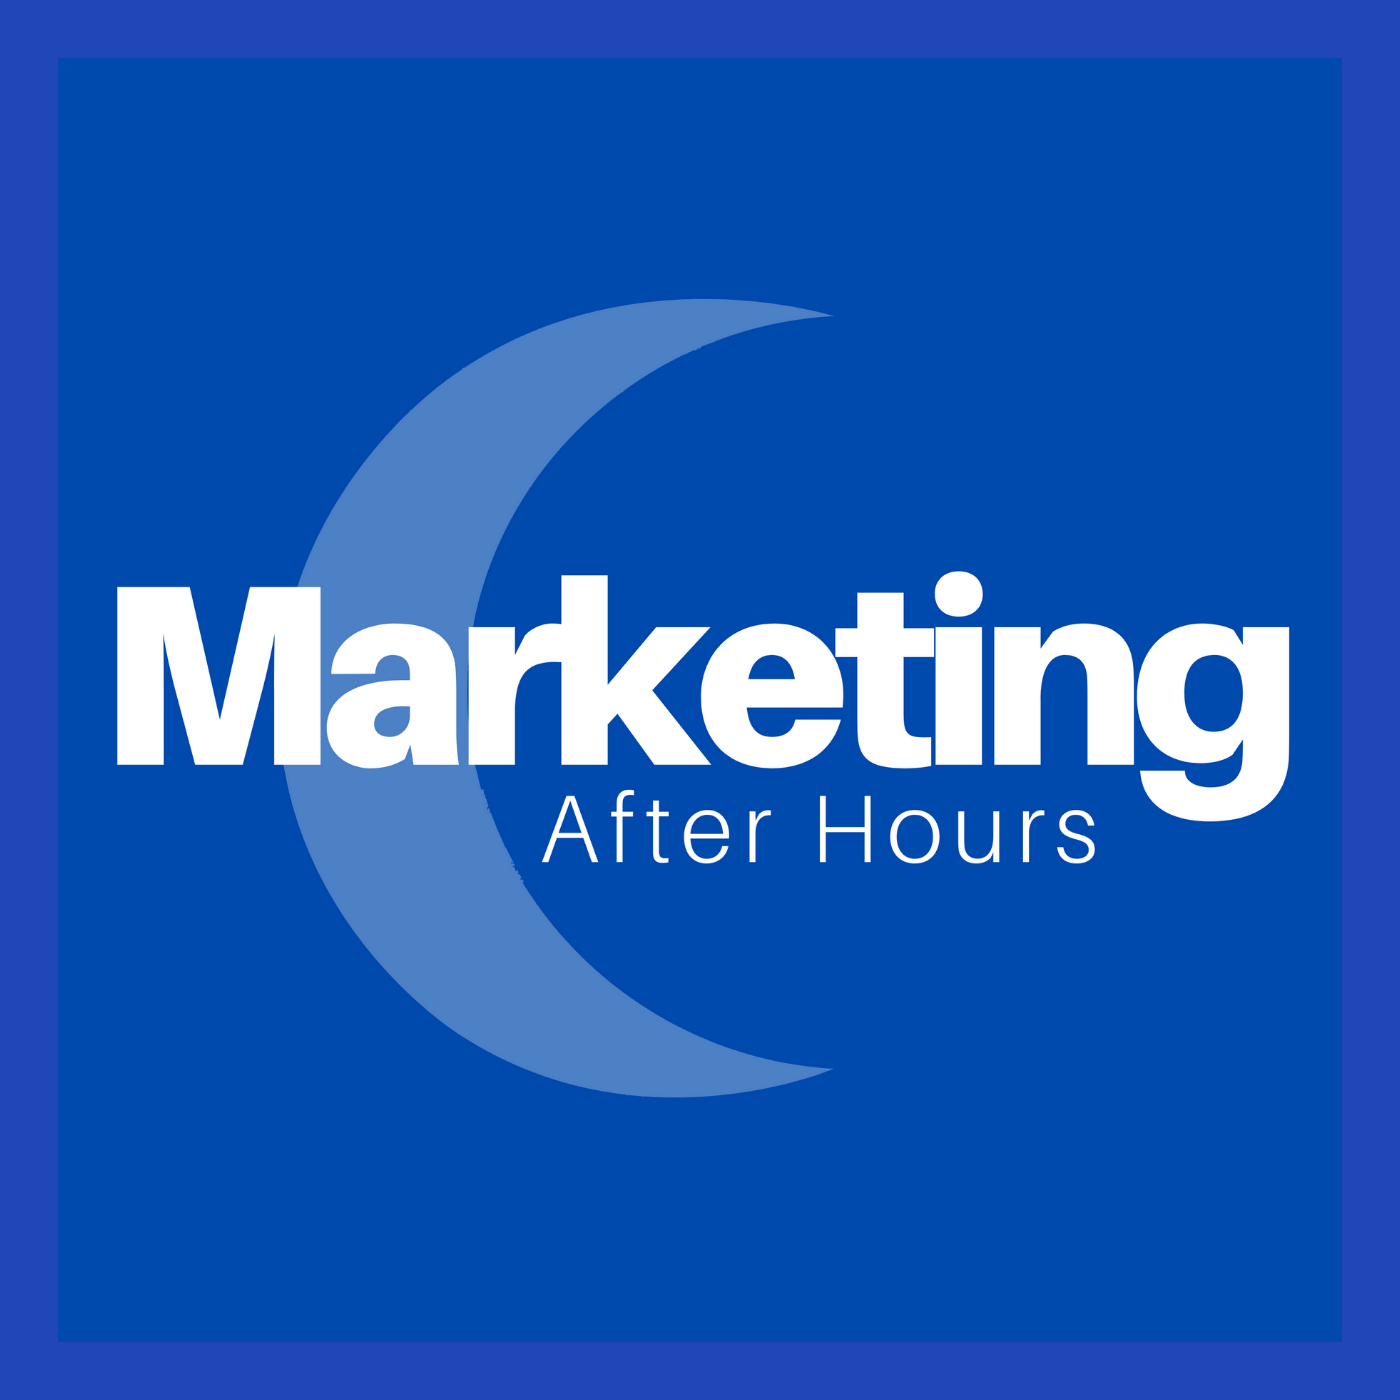 Marketing After Hours